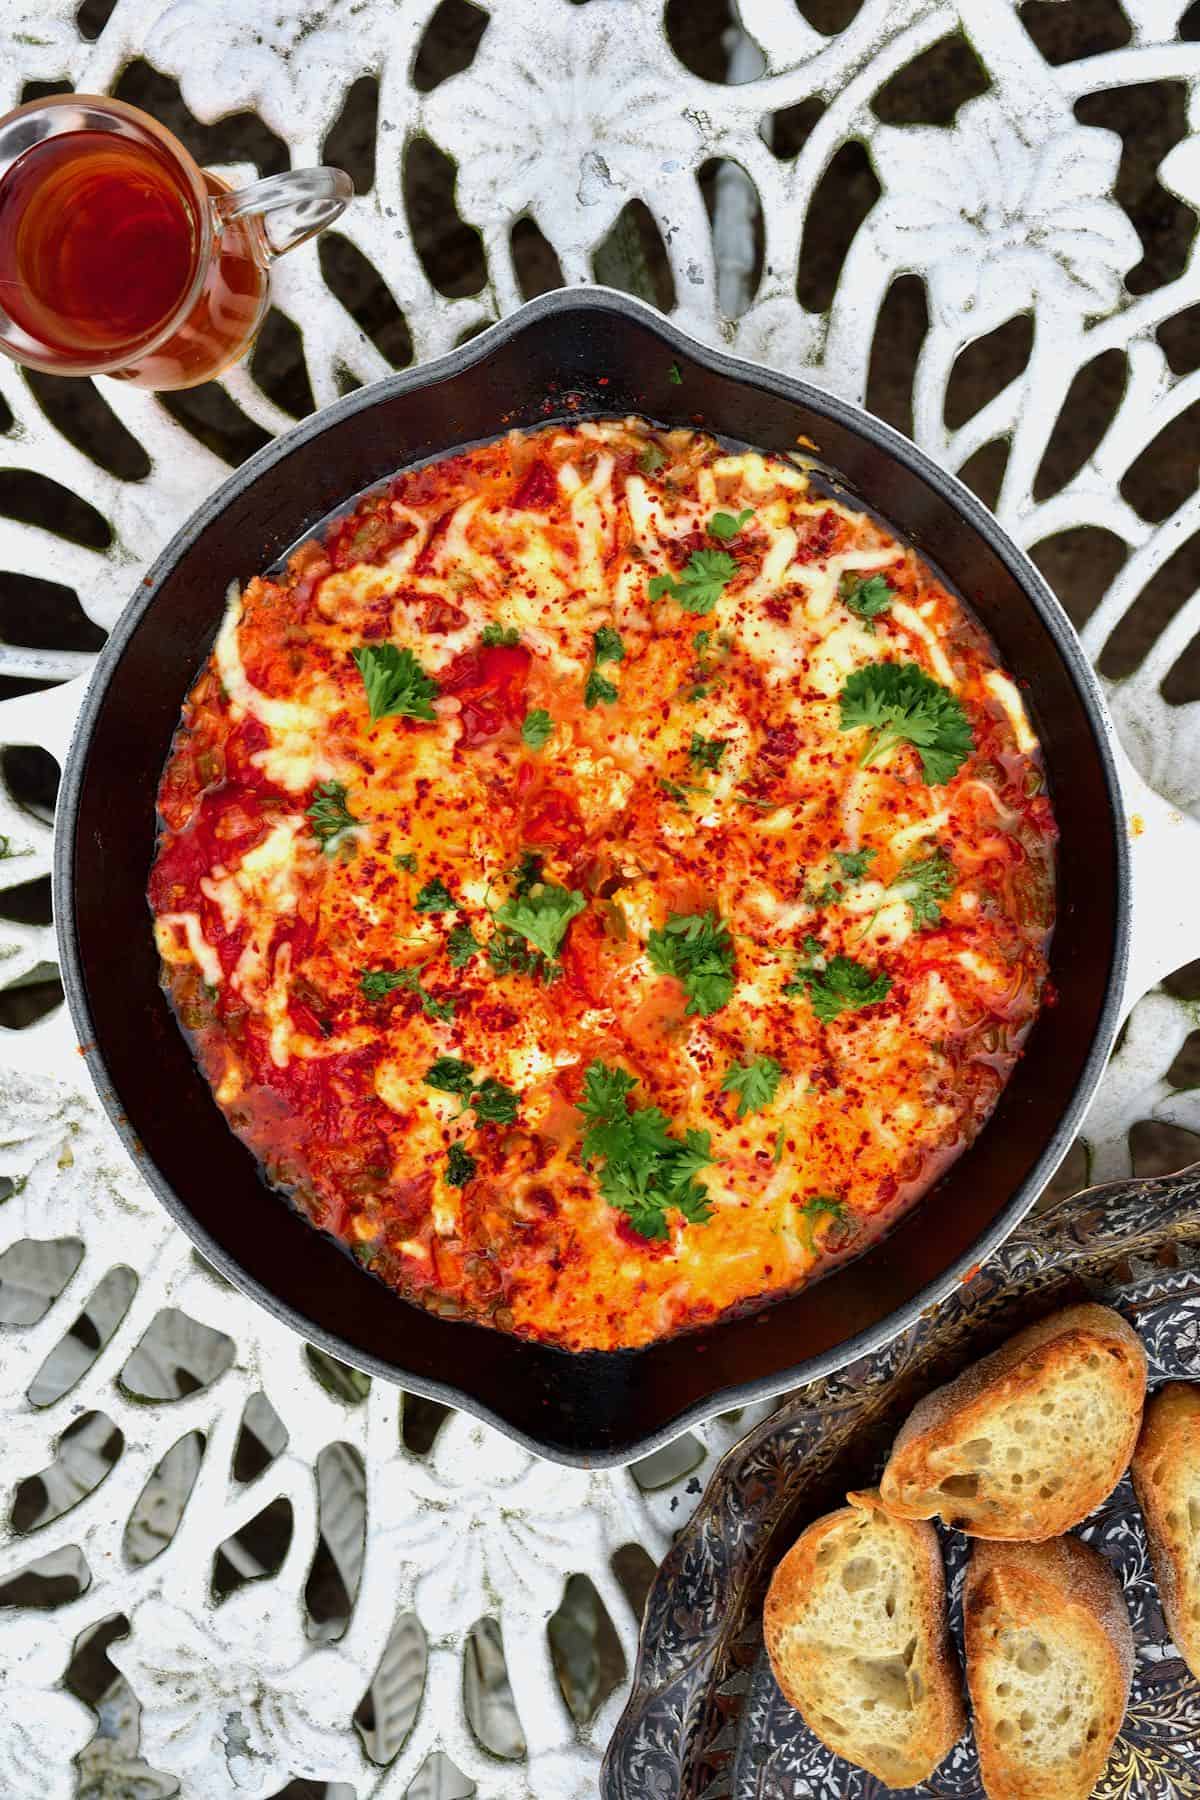 Menemen in a pan with bread and tea